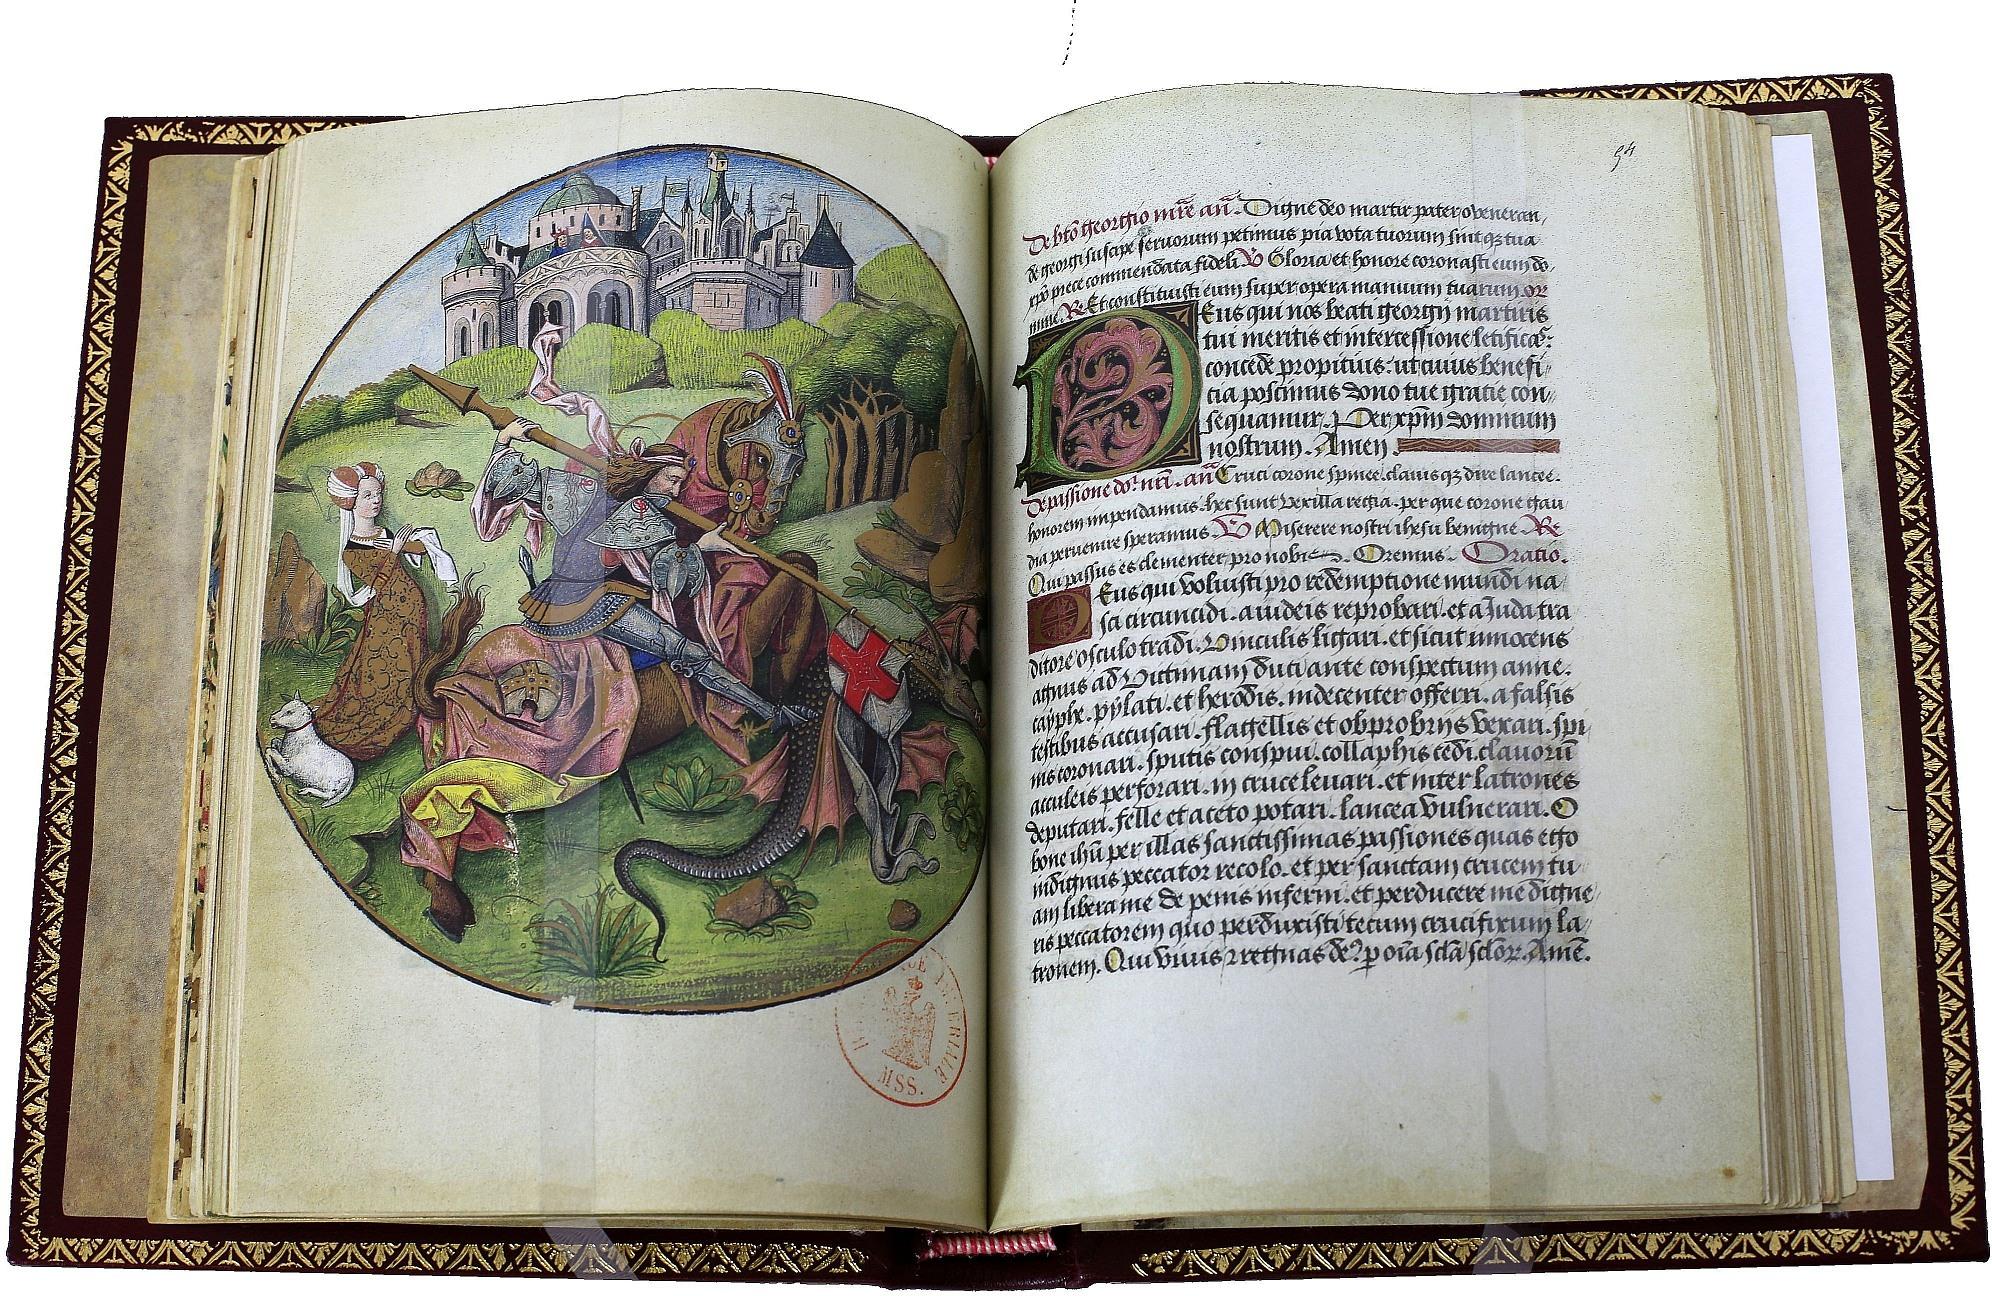 This is a one-time only facsimile edition limited to 987 copies of an illuminated manuscript in Renaissance style, the Book of Hours of Charles of Angoulême, father to Francis I of France, owned by the Bibliothèque nationale de France, made by